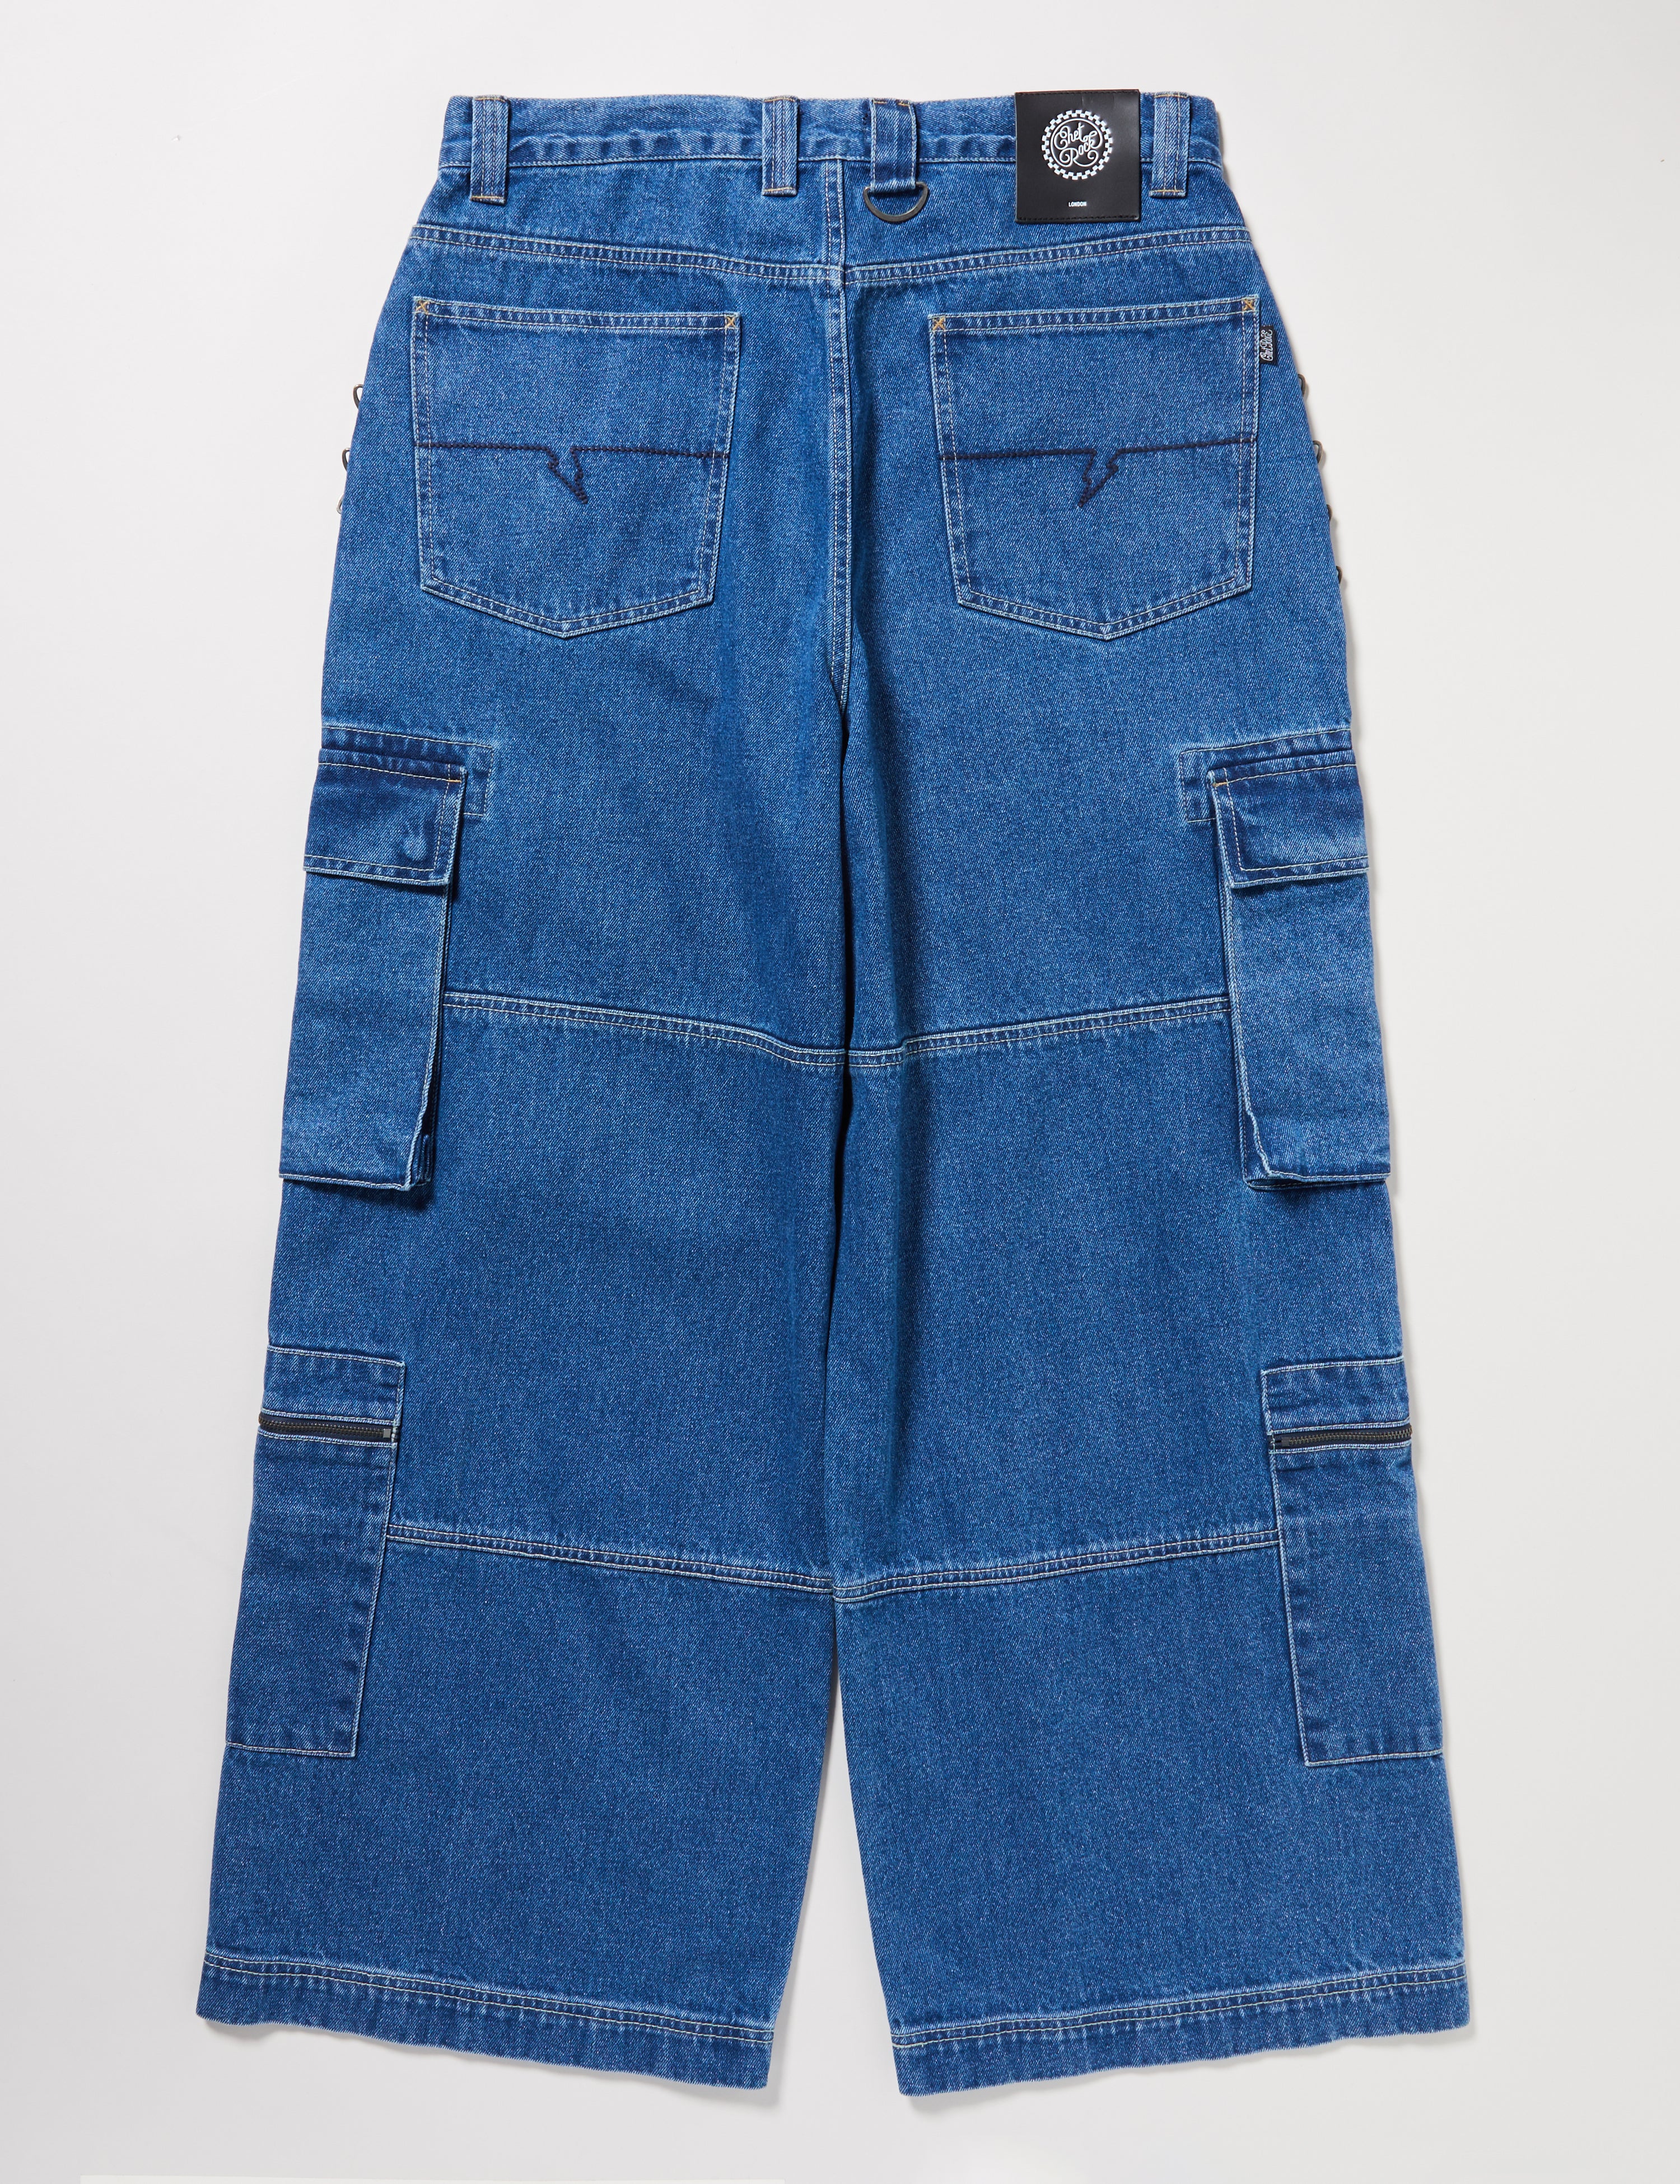 Monaghan Utility Jeans - Stone